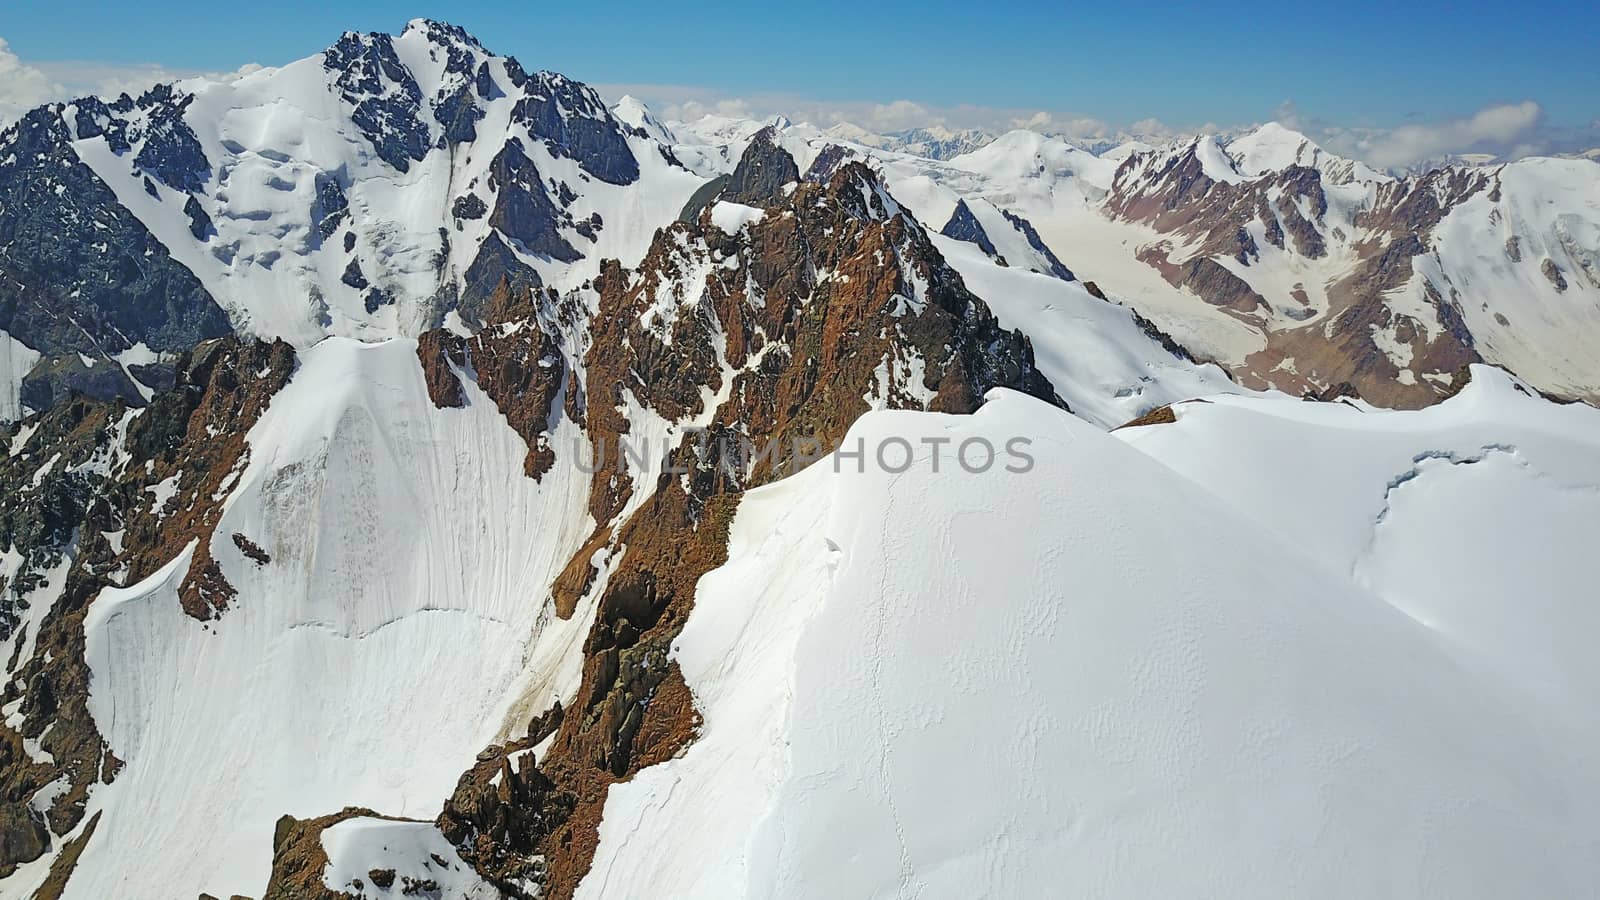 Huge snow mountains. View from the top of the drone. In places, you can see small people climbing to the top. Panorama of steep peaks and rocks, snow cornices. Mountaineering class. Extreme rest.